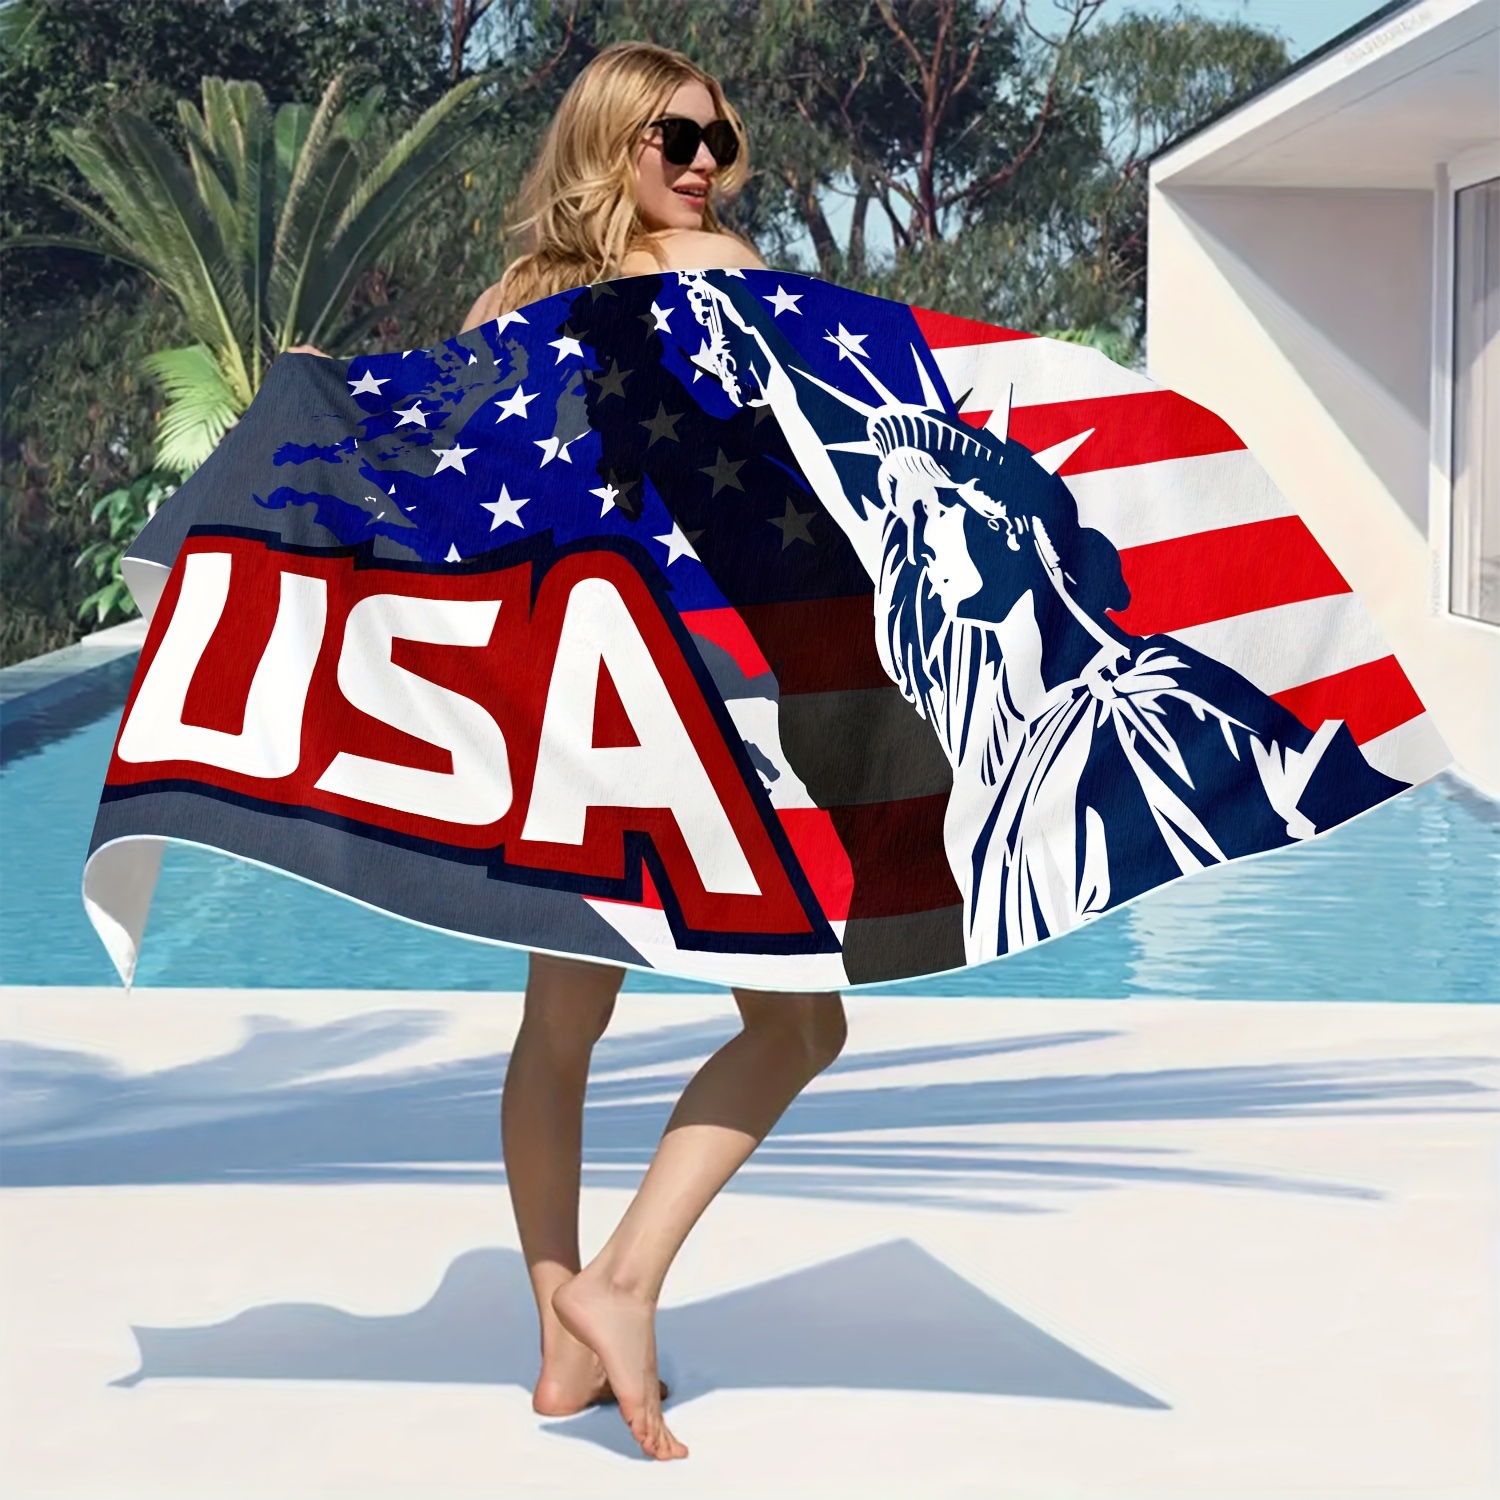 

4th Of July Microfiber Beach Towel - Absorbent Knit Weave Lady Patriotic Pattern, Machine Washable, Lightweight Usa Flag Design Towel For Beach And Pool Parties - 280gsm, 1pc